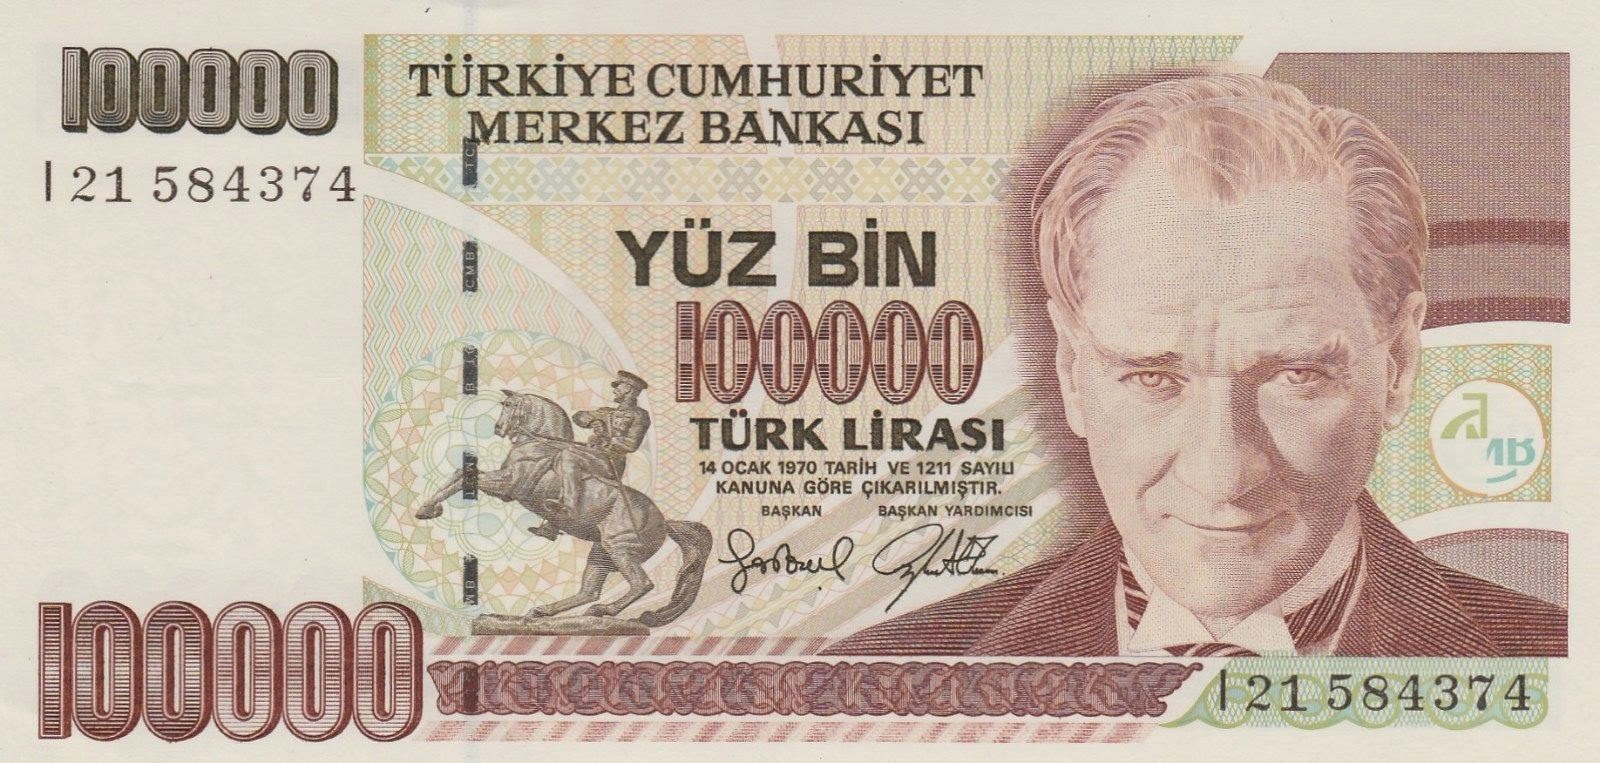 Turkish Lira Note. World Banknotes & Coins Picture. Old Money, Foreign Currency Notes, World Paper Money Museum